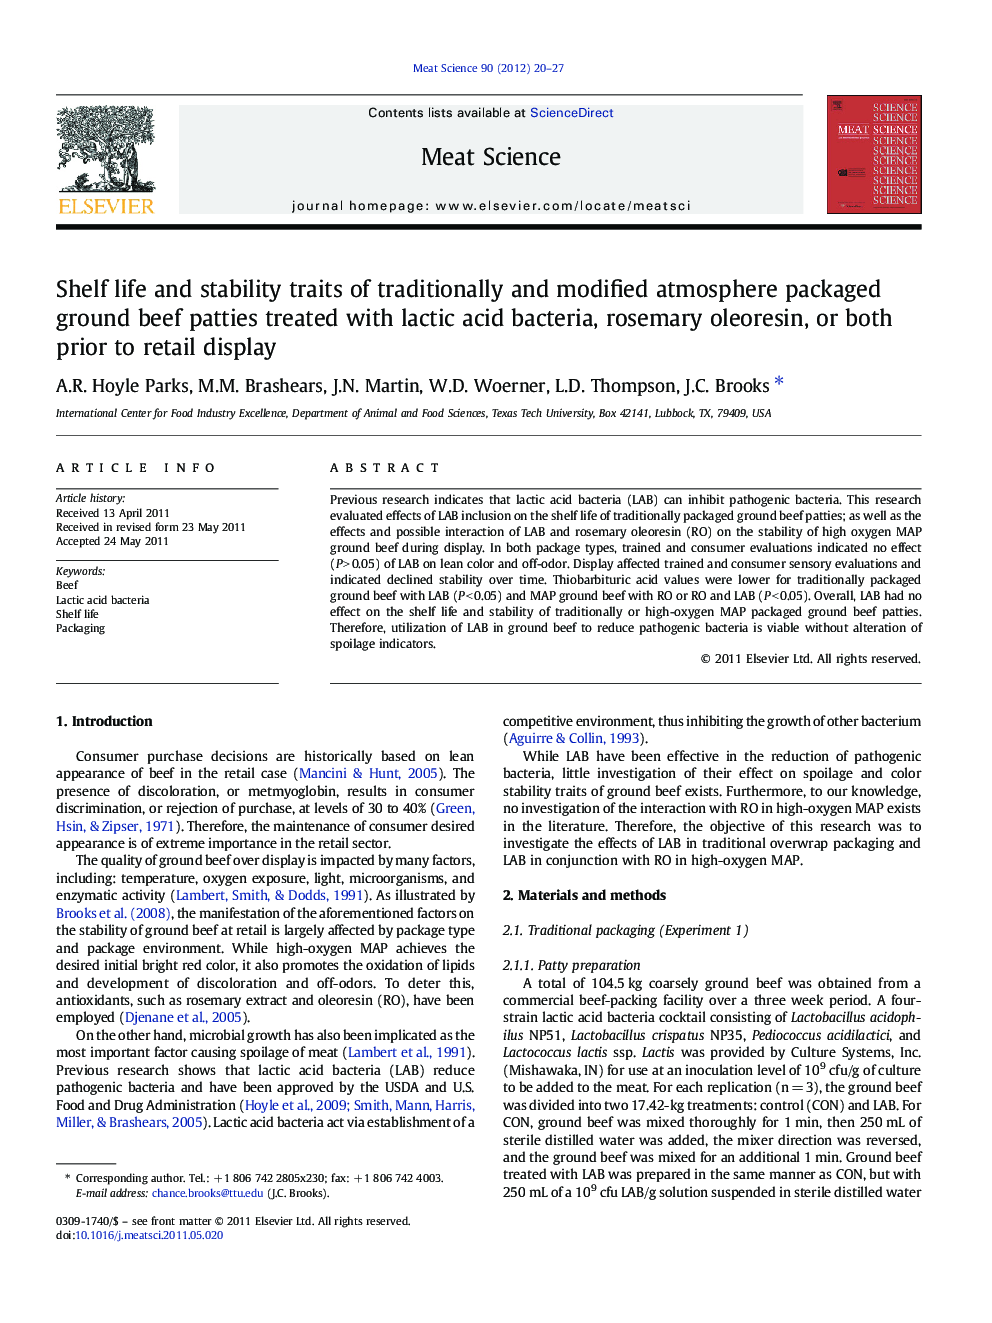 Shelf life and stability traits of traditionally and modified atmosphere packaged ground beef patties treated with lactic acid bacteria, rosemary oleoresin, or both prior to retail display